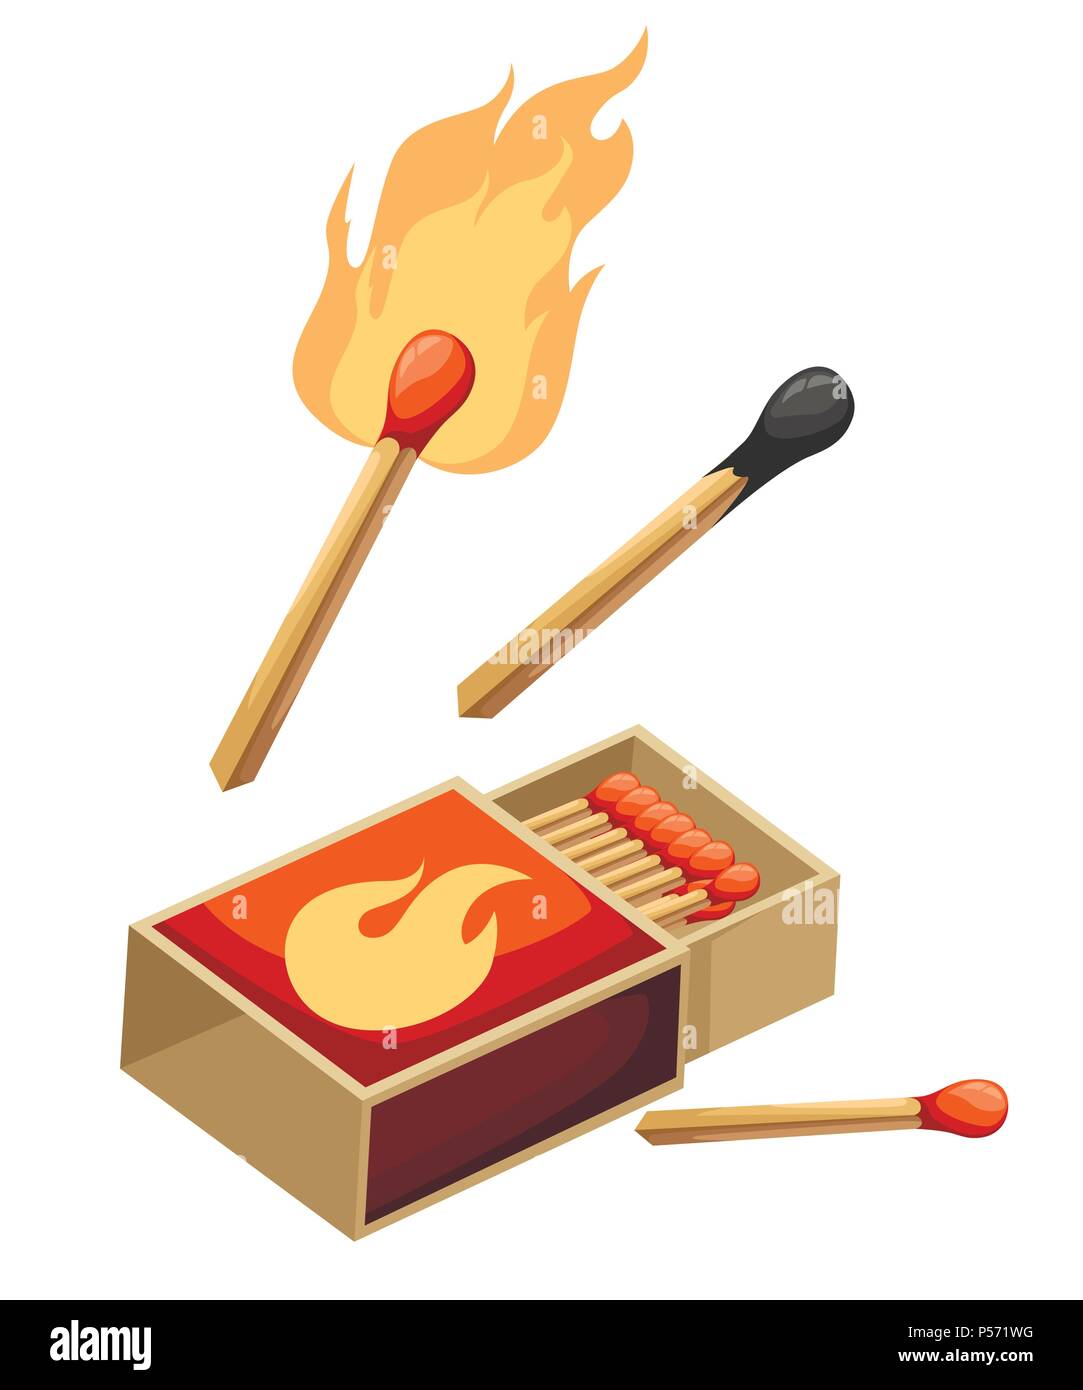 Collection of matches. Burning match with fire, opened matchbox, burnt matchstick. Flat design style. Vector illustration isolated on white background Stock Vector